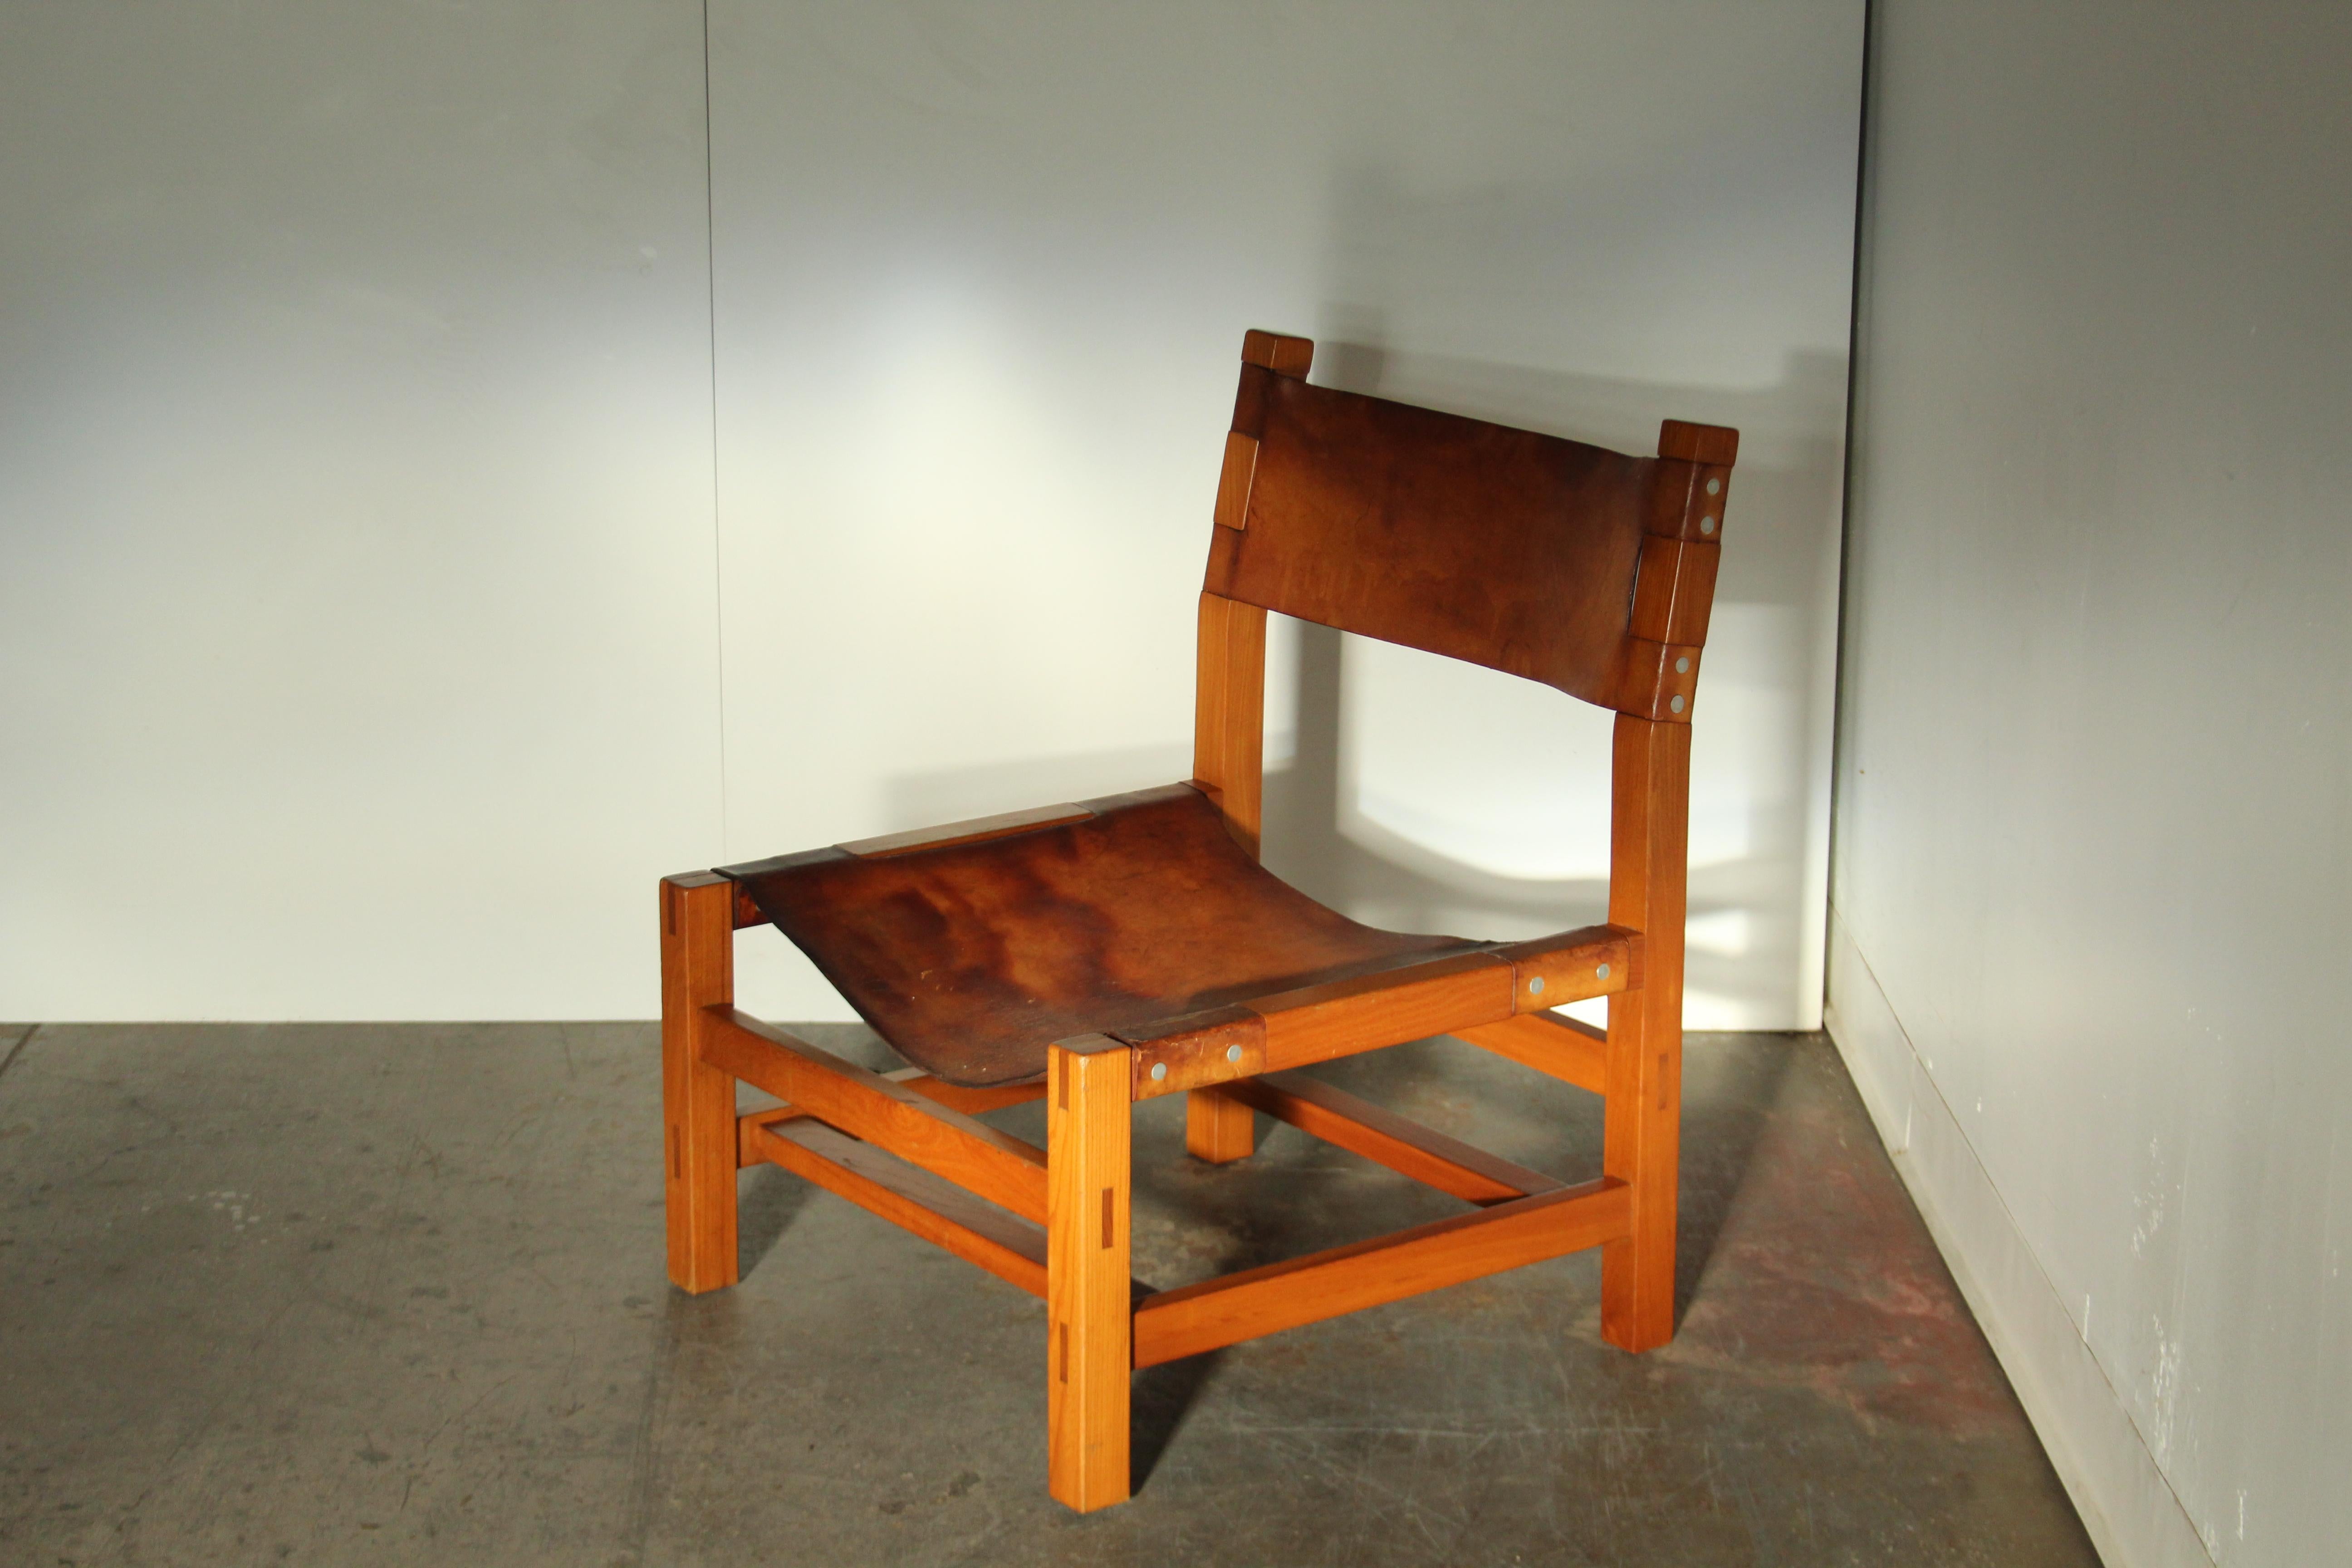 A stunning French fireside lounge chair produced in the 1970s, attributed to Maison Regain. Simplistic angular form with sophisticated wood joinery and amazing inset leather detailing. Solid elm frame. The original leather shows tons of patina. The